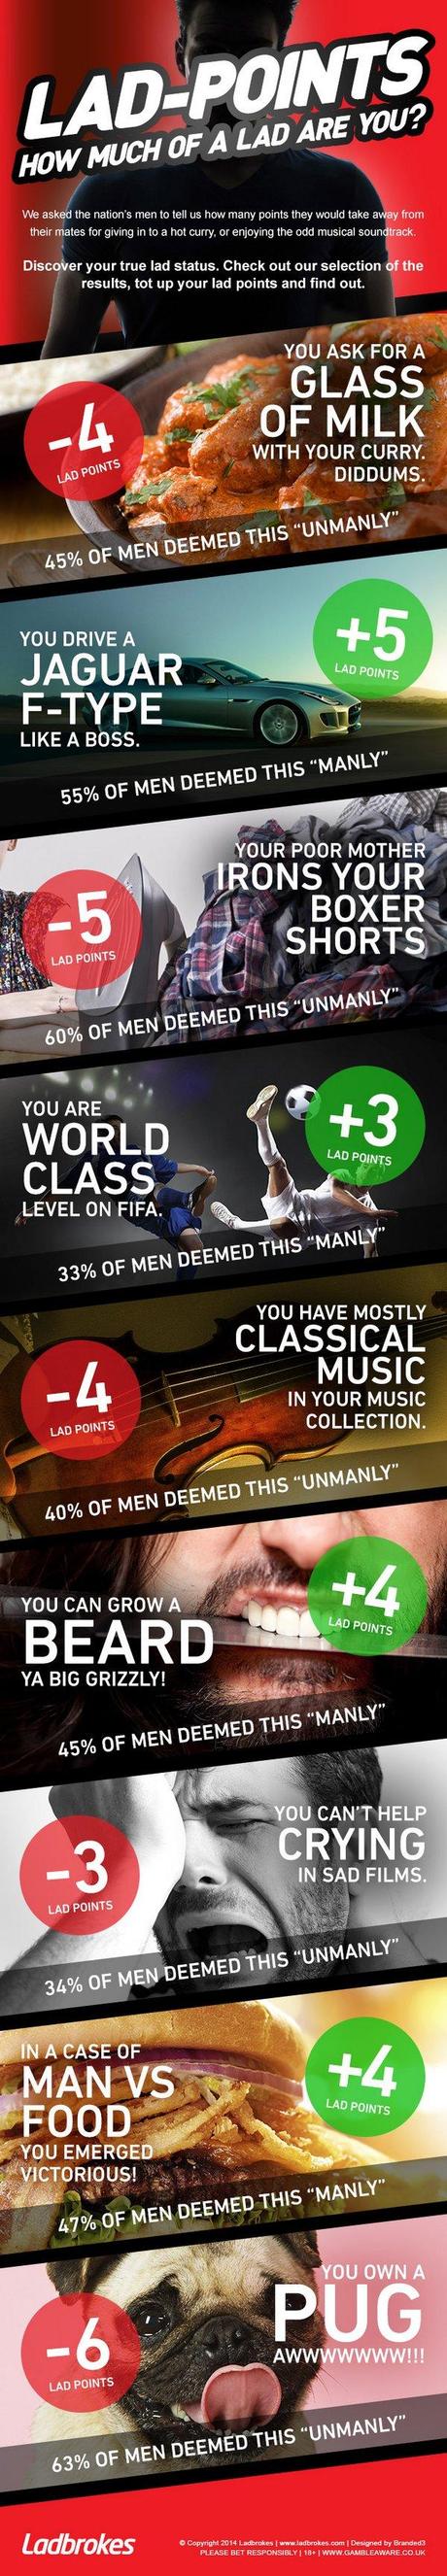 manliest-guy-infographic